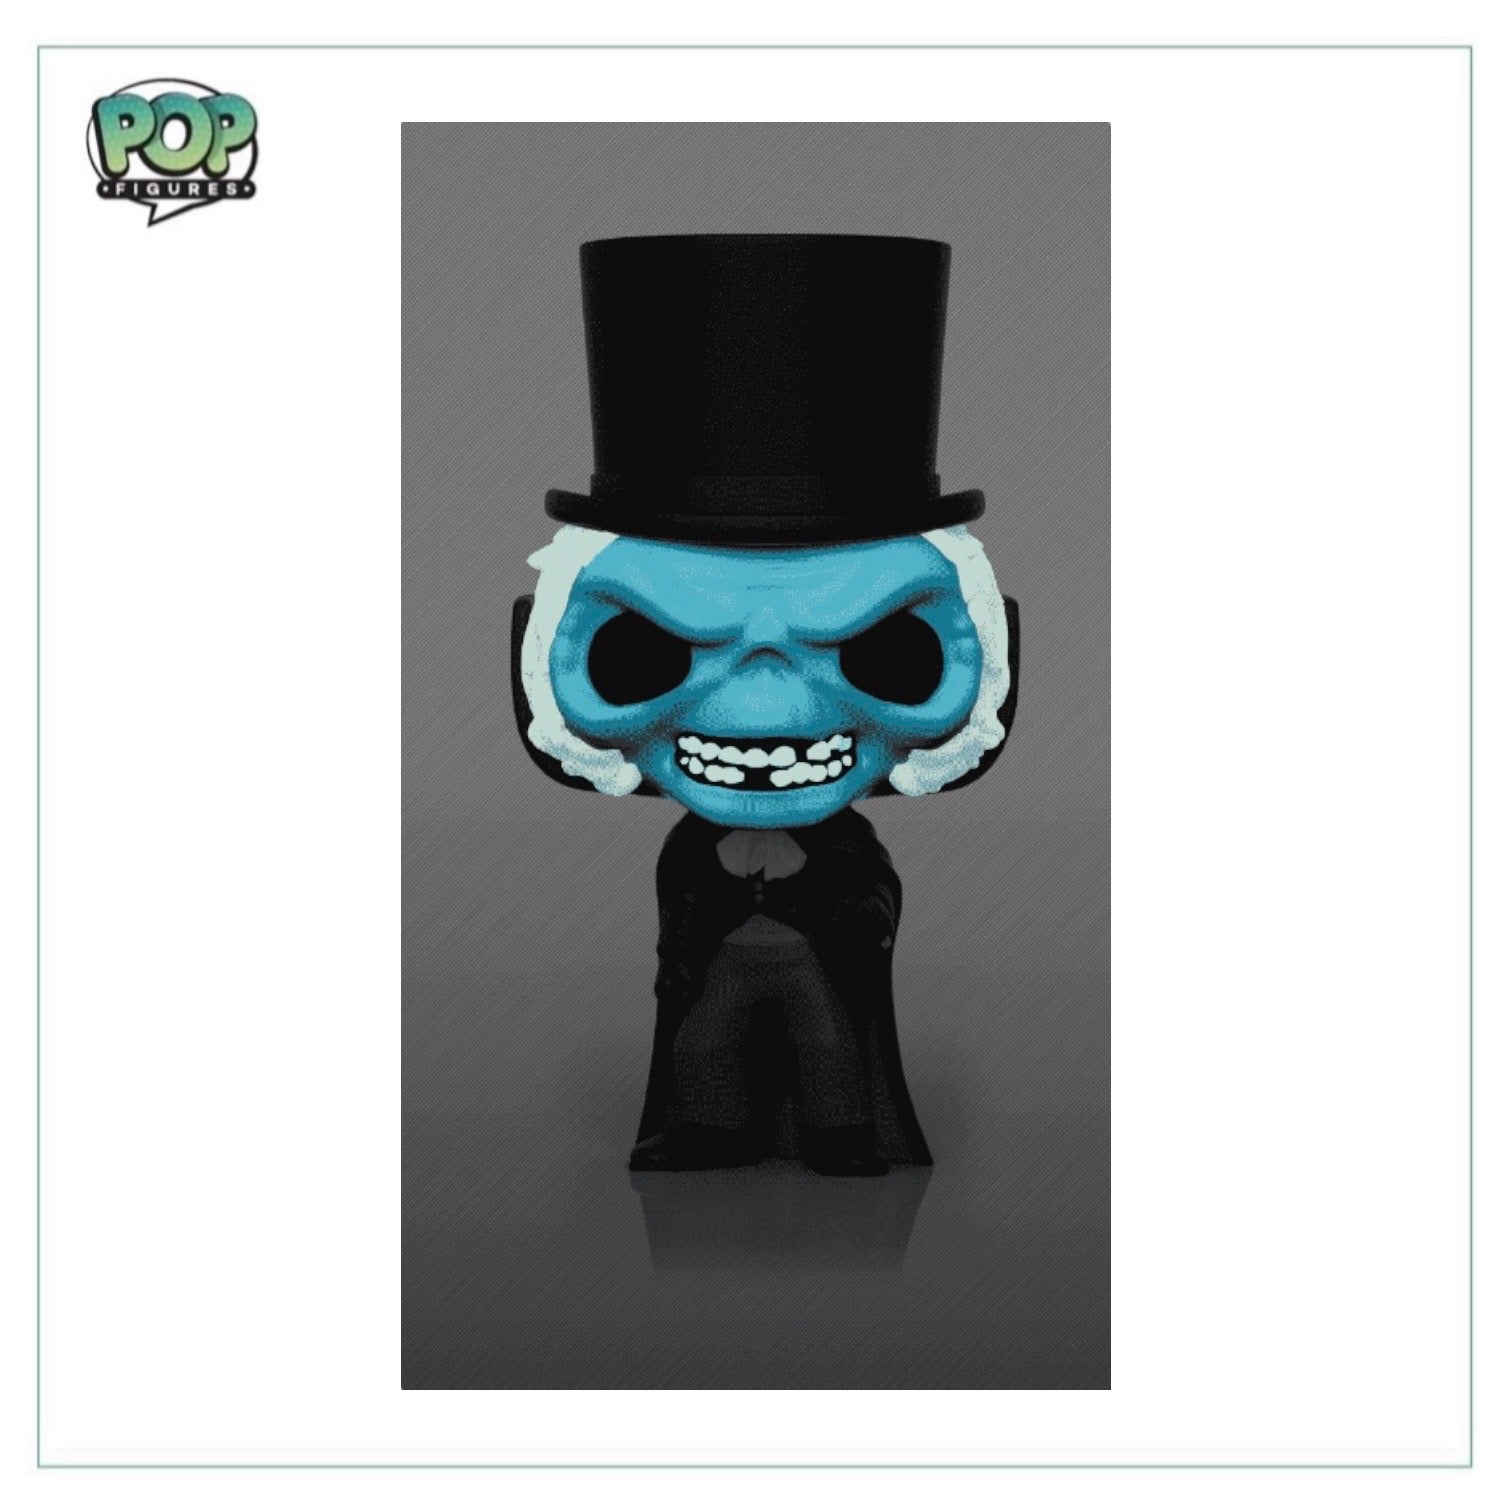 Hatbox Ghost #1430 (Glows in the Dark) Funko Pop! - Haunted Mansion - Funko Hollywood Exclusive